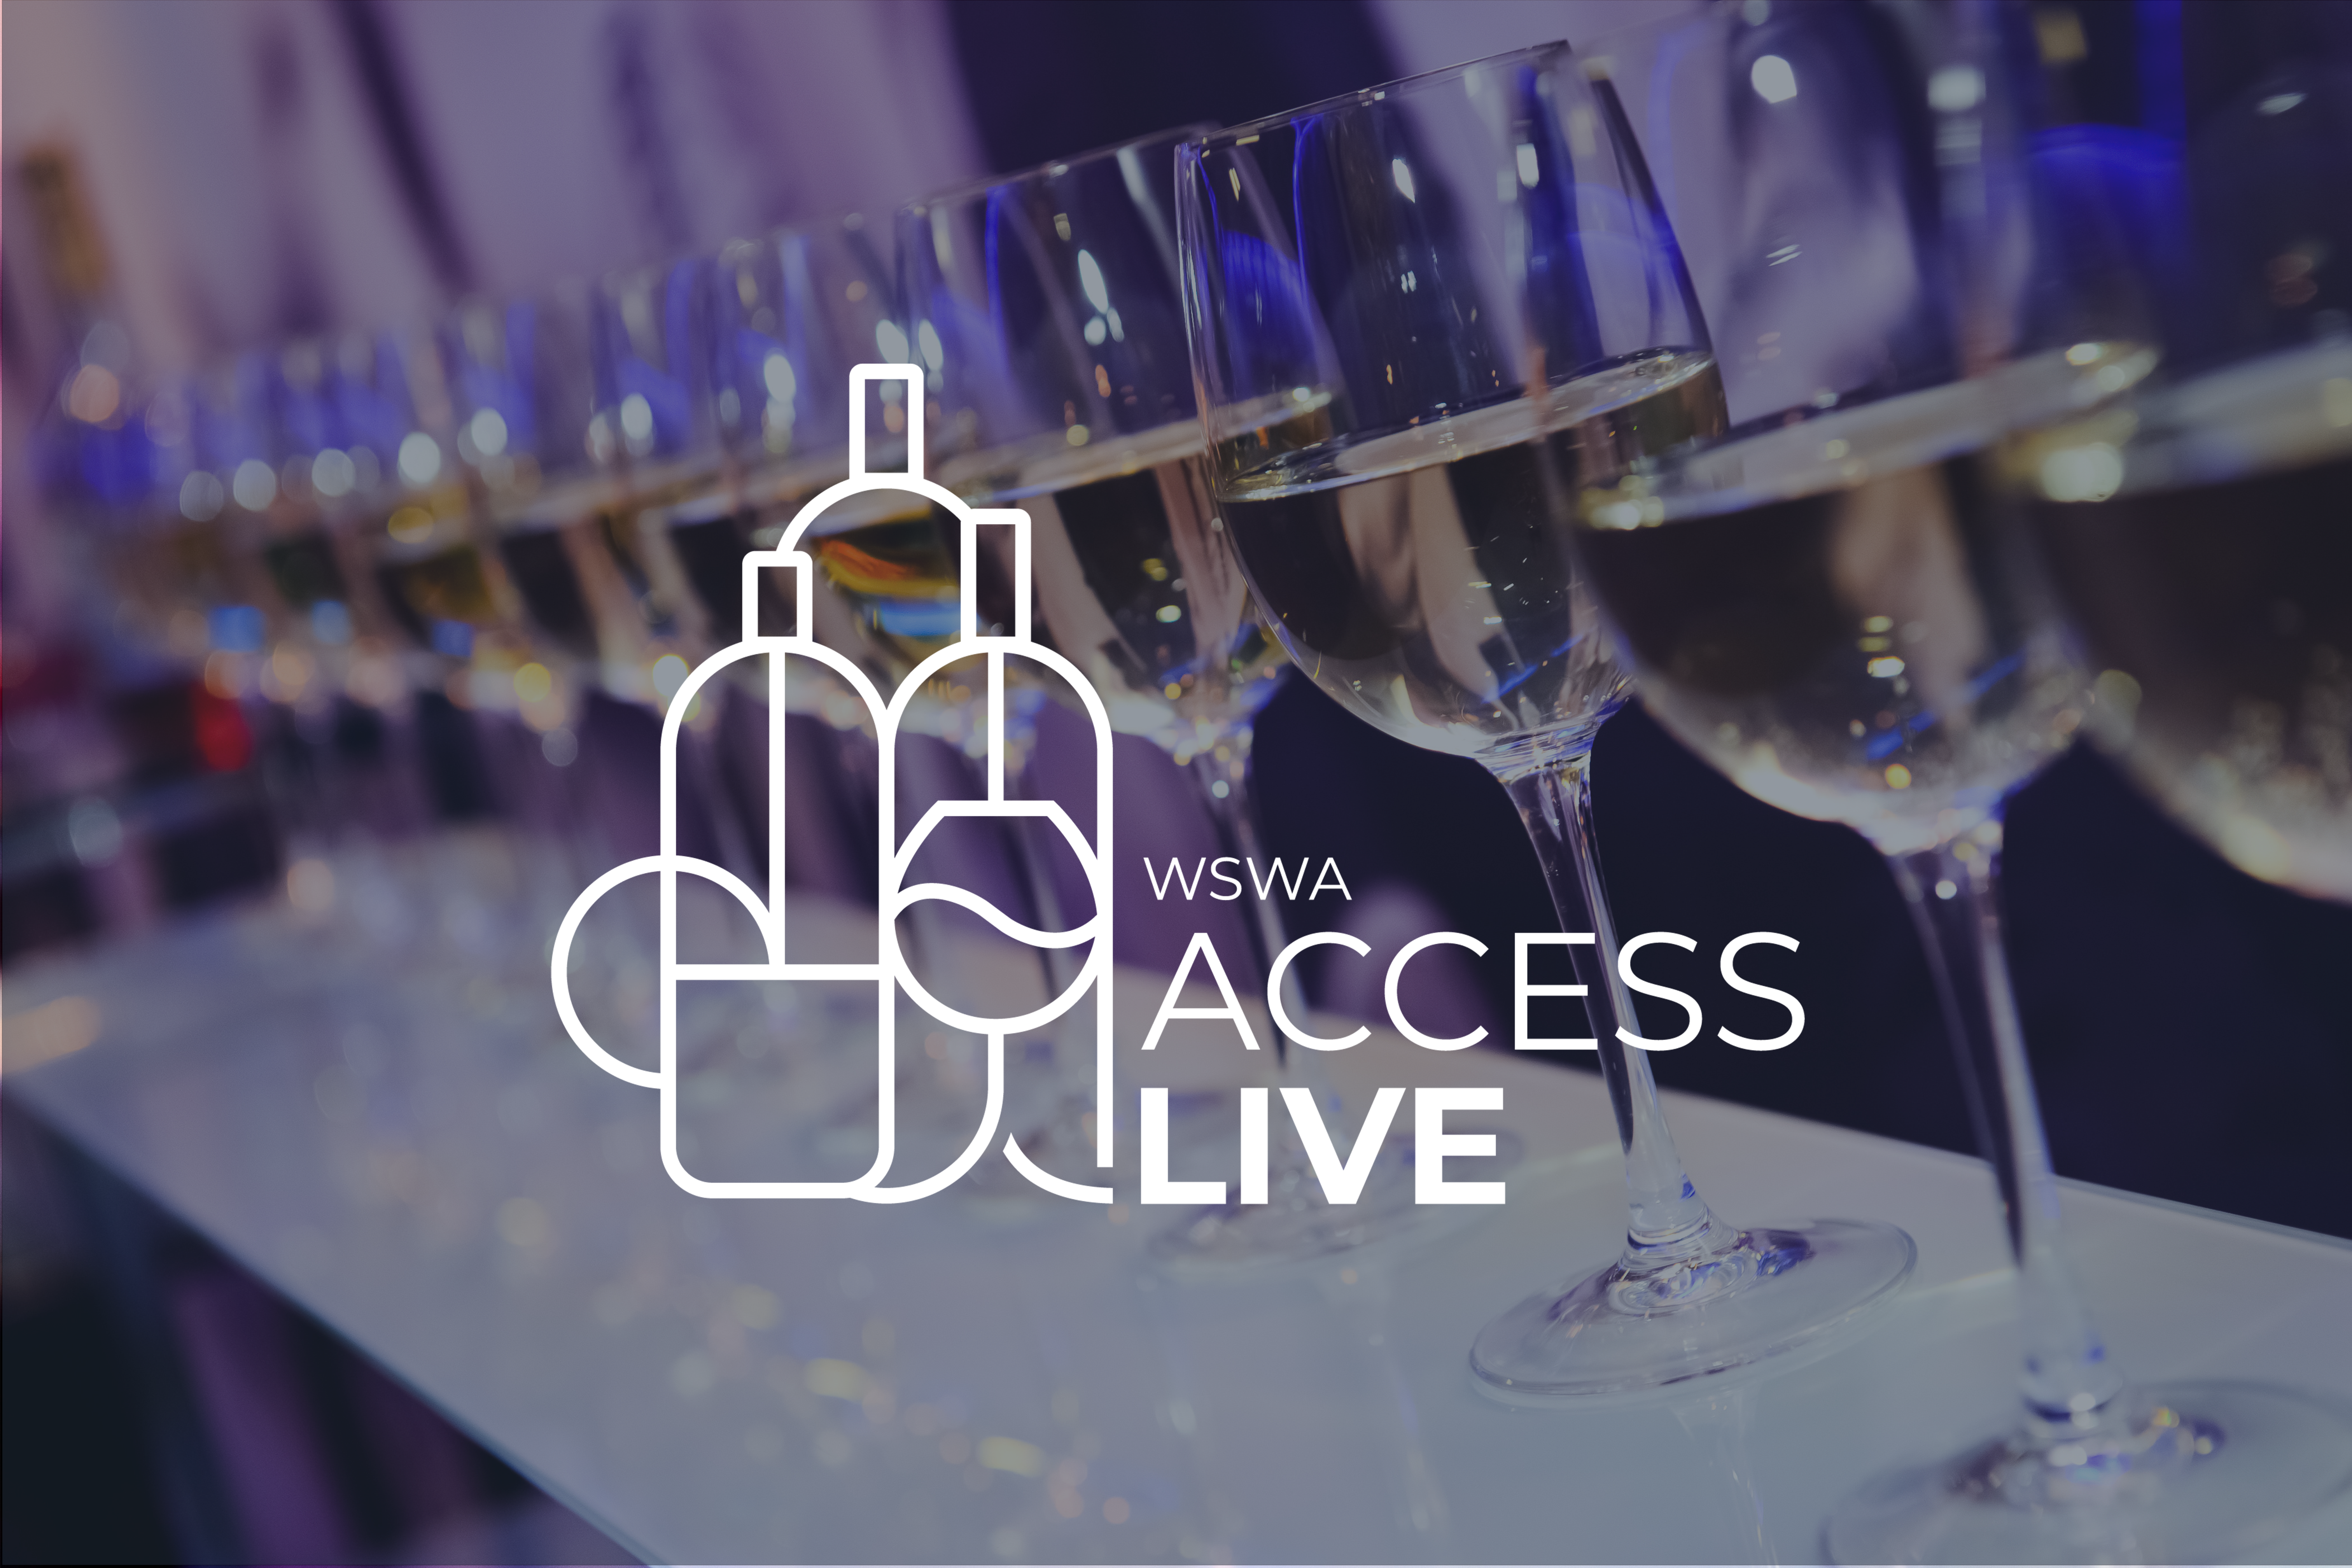 About Access LIVE